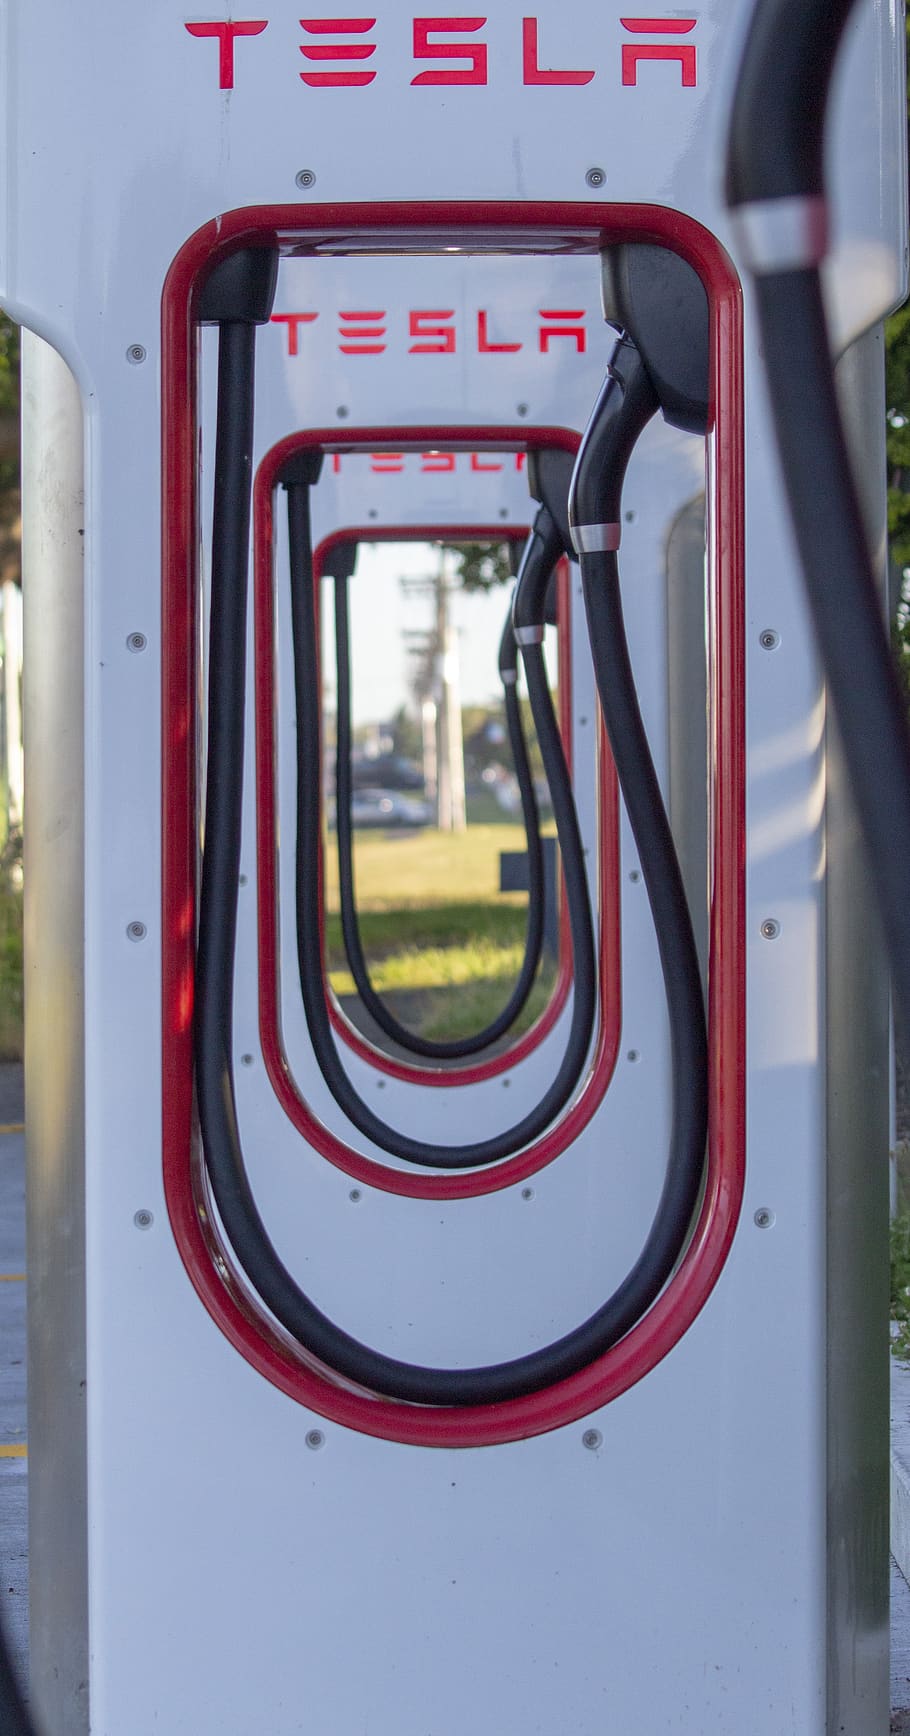 tesla, car, electric, charging, metal, red, day, close-up, outdoors, vehicle interior